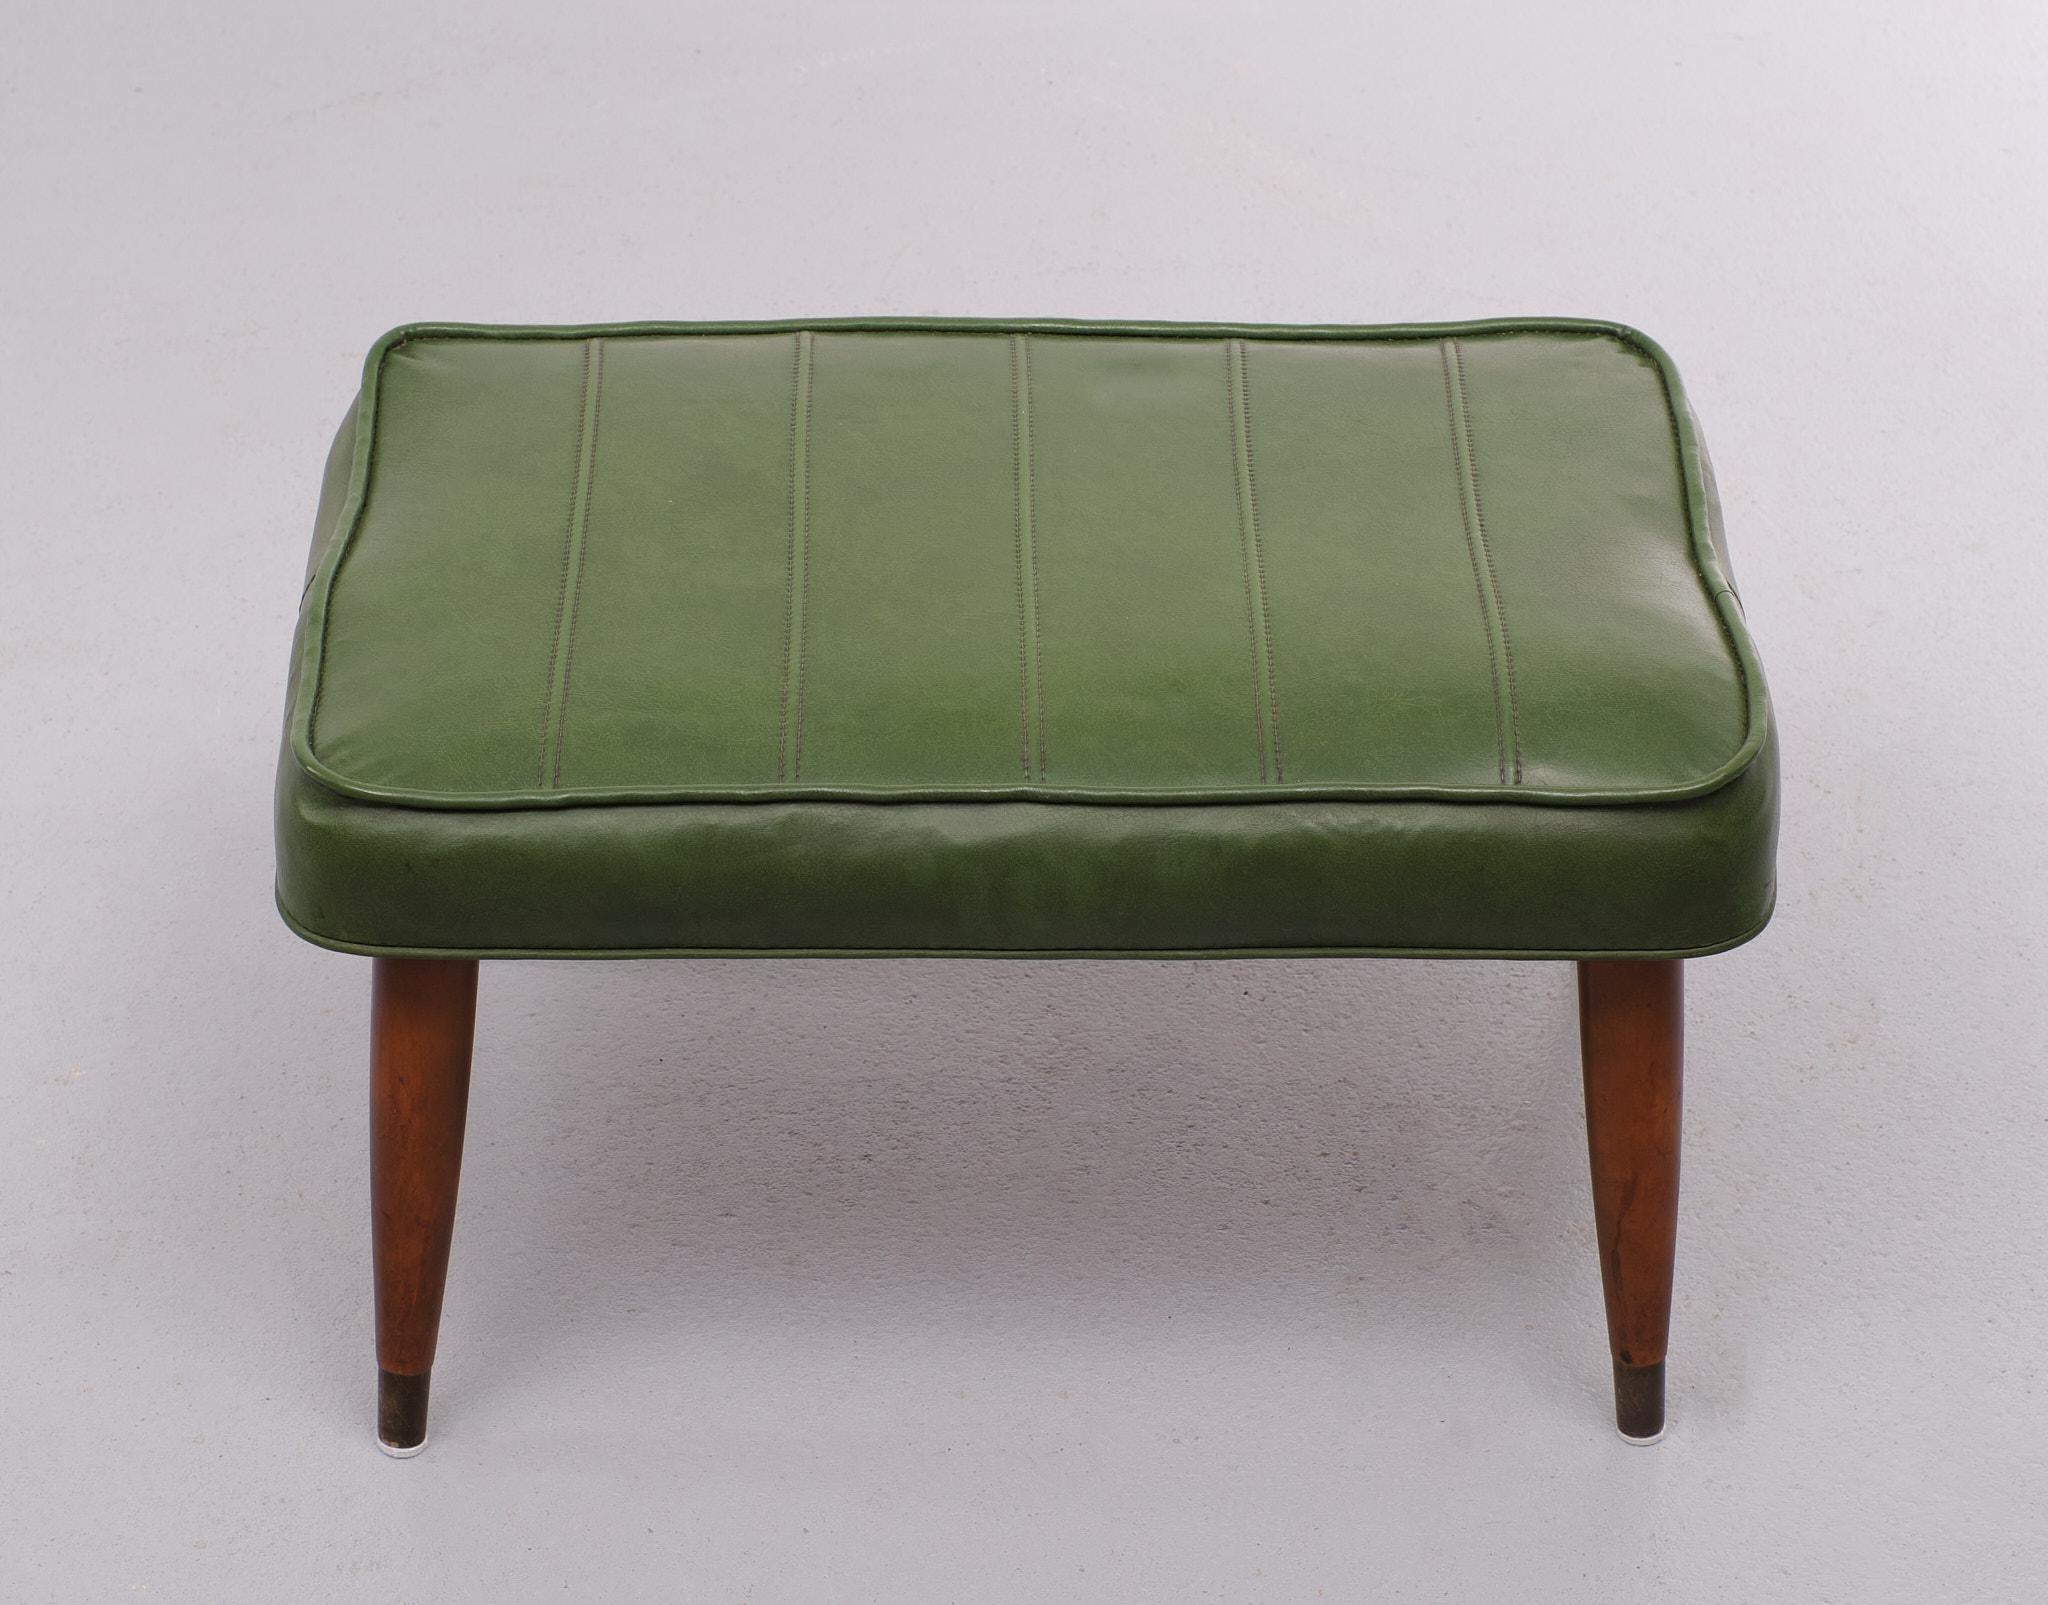 Very nice authentic foot stool. Green Faux Leather upholstery. Mahogany legs 
comes with Brass feet. Great looking stoo. Normal wear and tear.